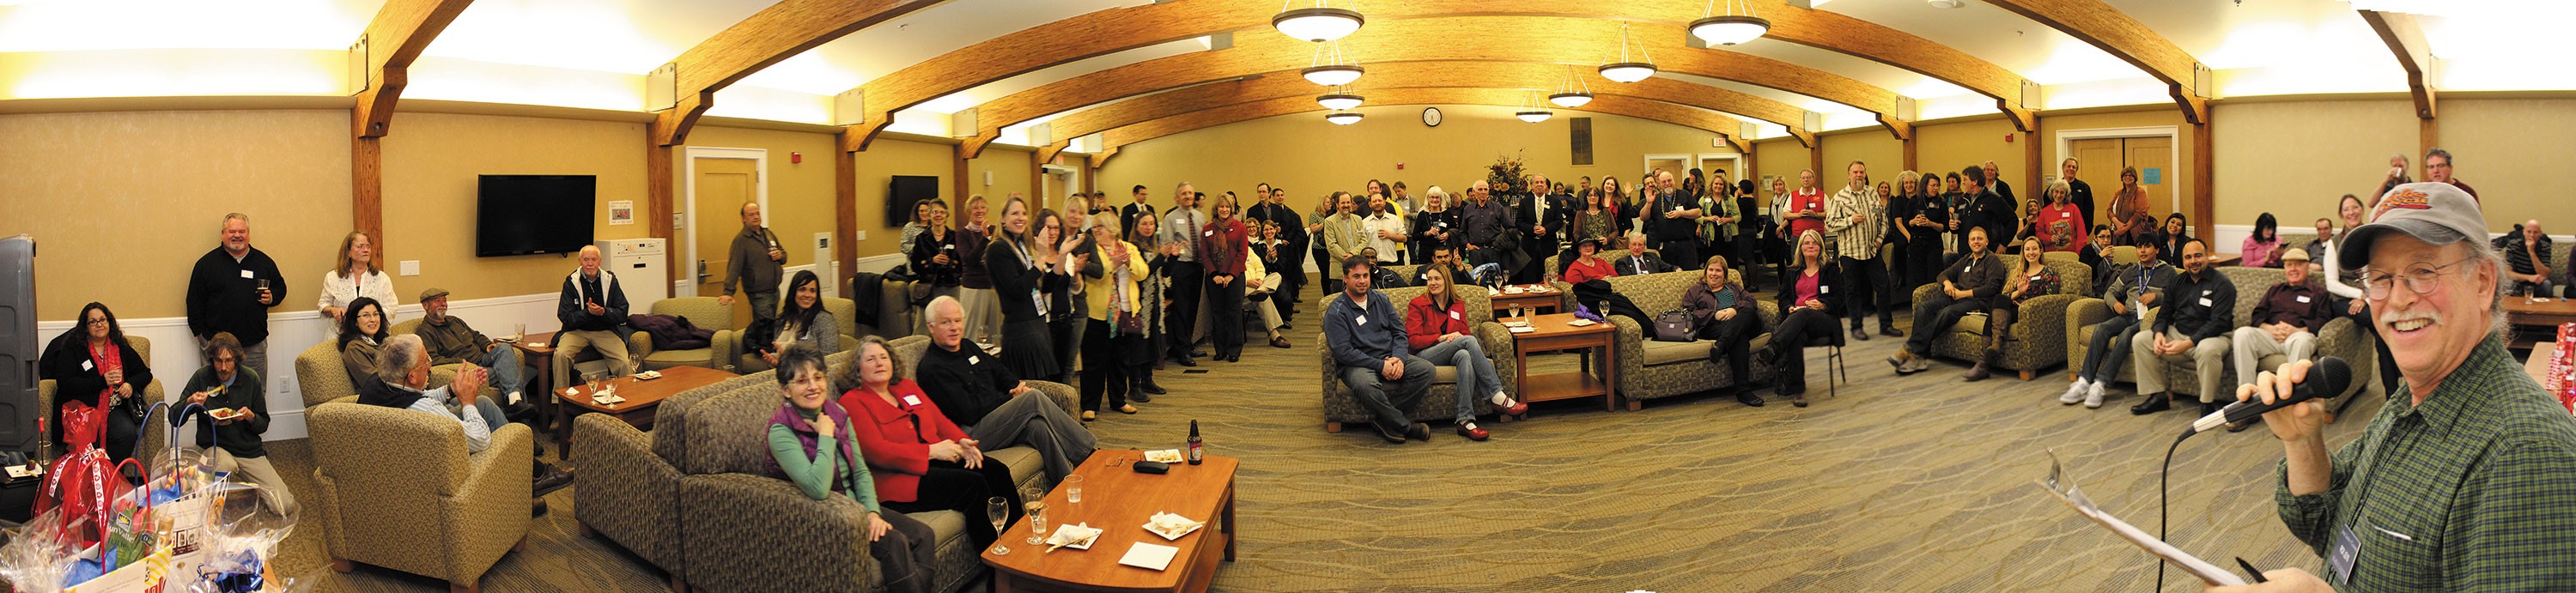 Arcata Chamber of Commerce President Rick Levin introduces guests at a mixer held in the Great Hall on the Humboldt State University campus, on Feb 6. - PHOTO BY BOB DORAN